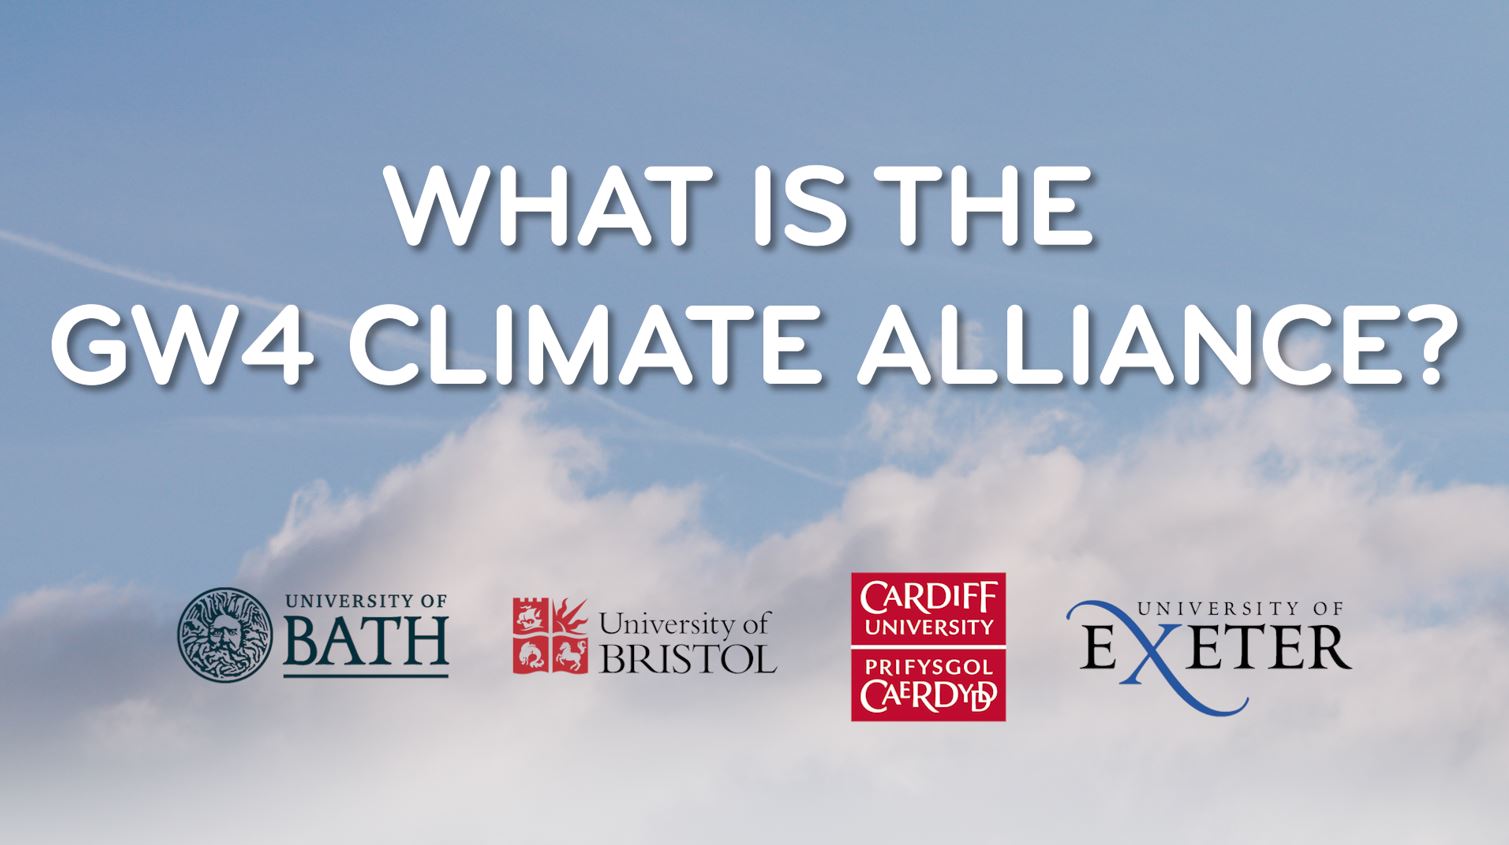 GW4 Climate Alliance launches new video to showcase research expertise